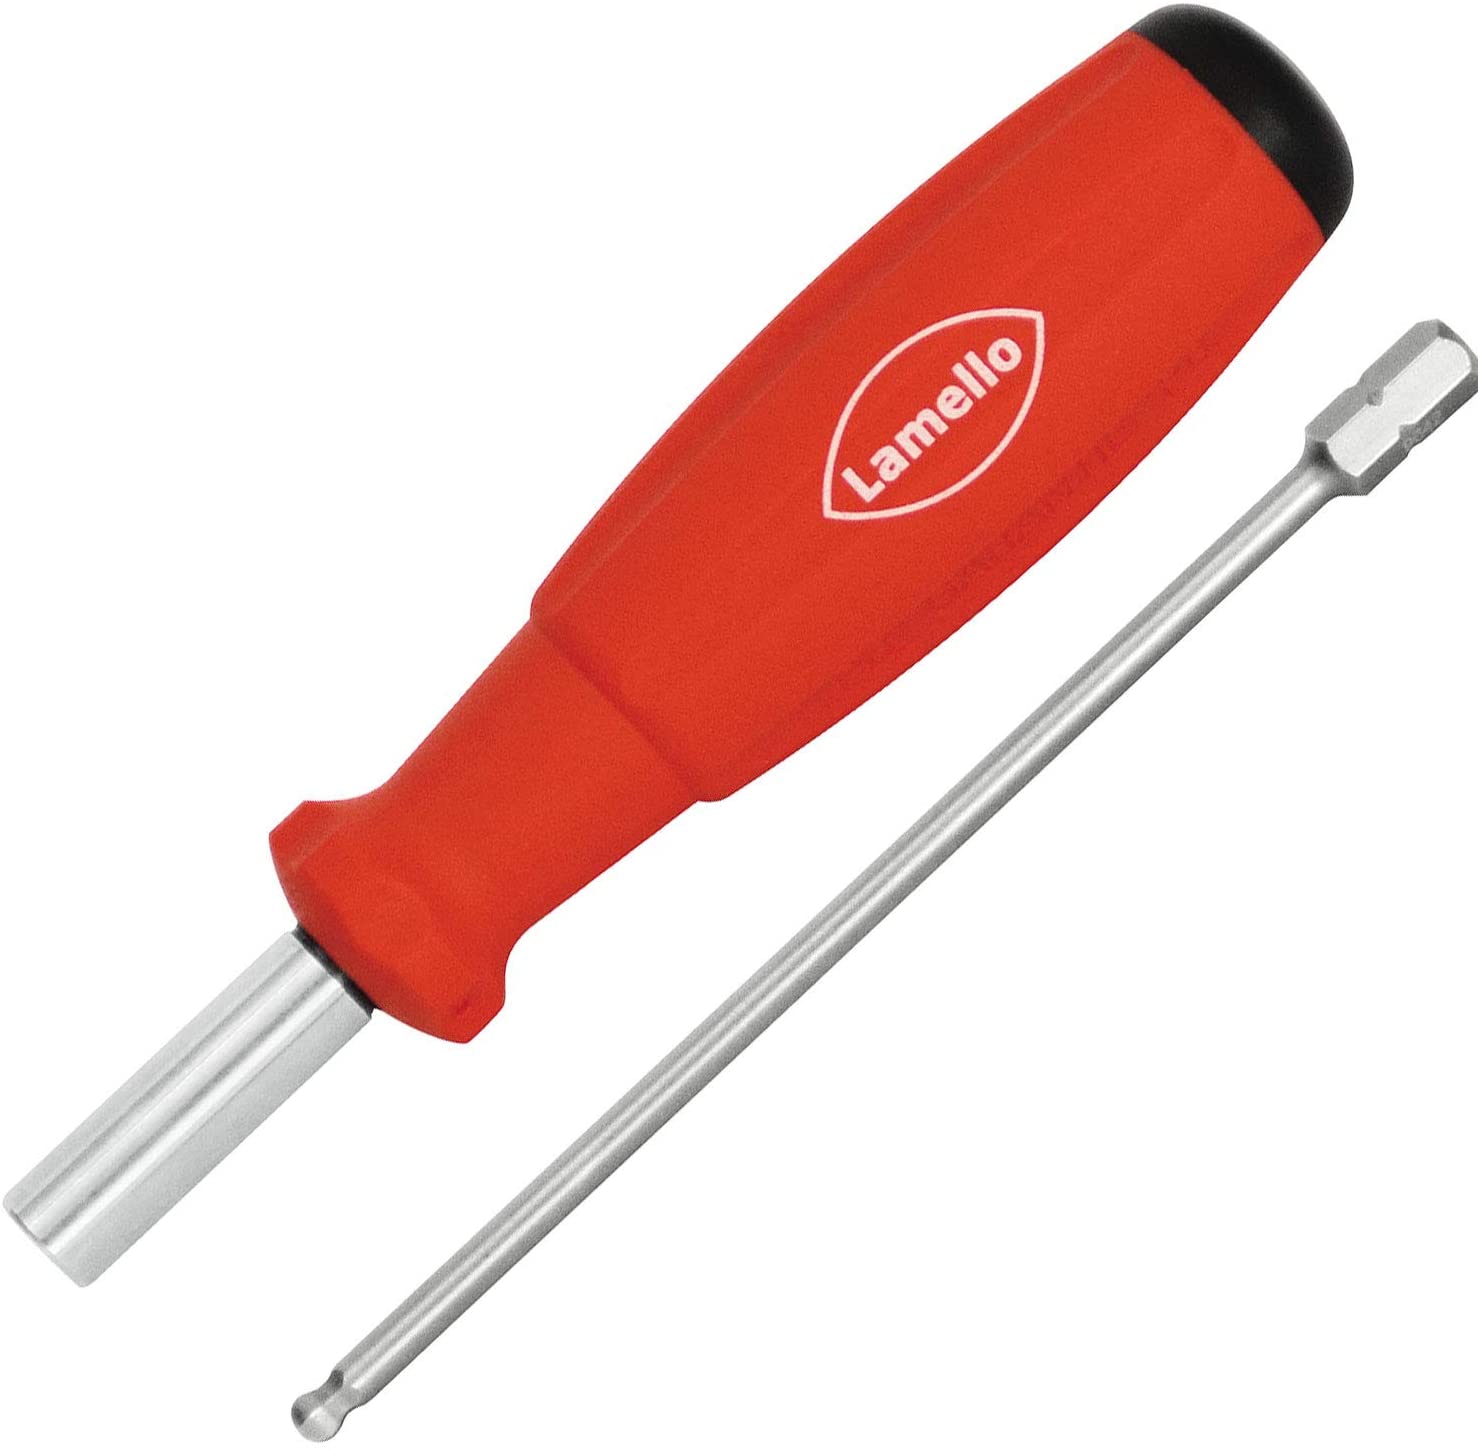 Lamello screwdriver handle with replaceable 1/4" ball end hex bit for fastening Cabineo connectors